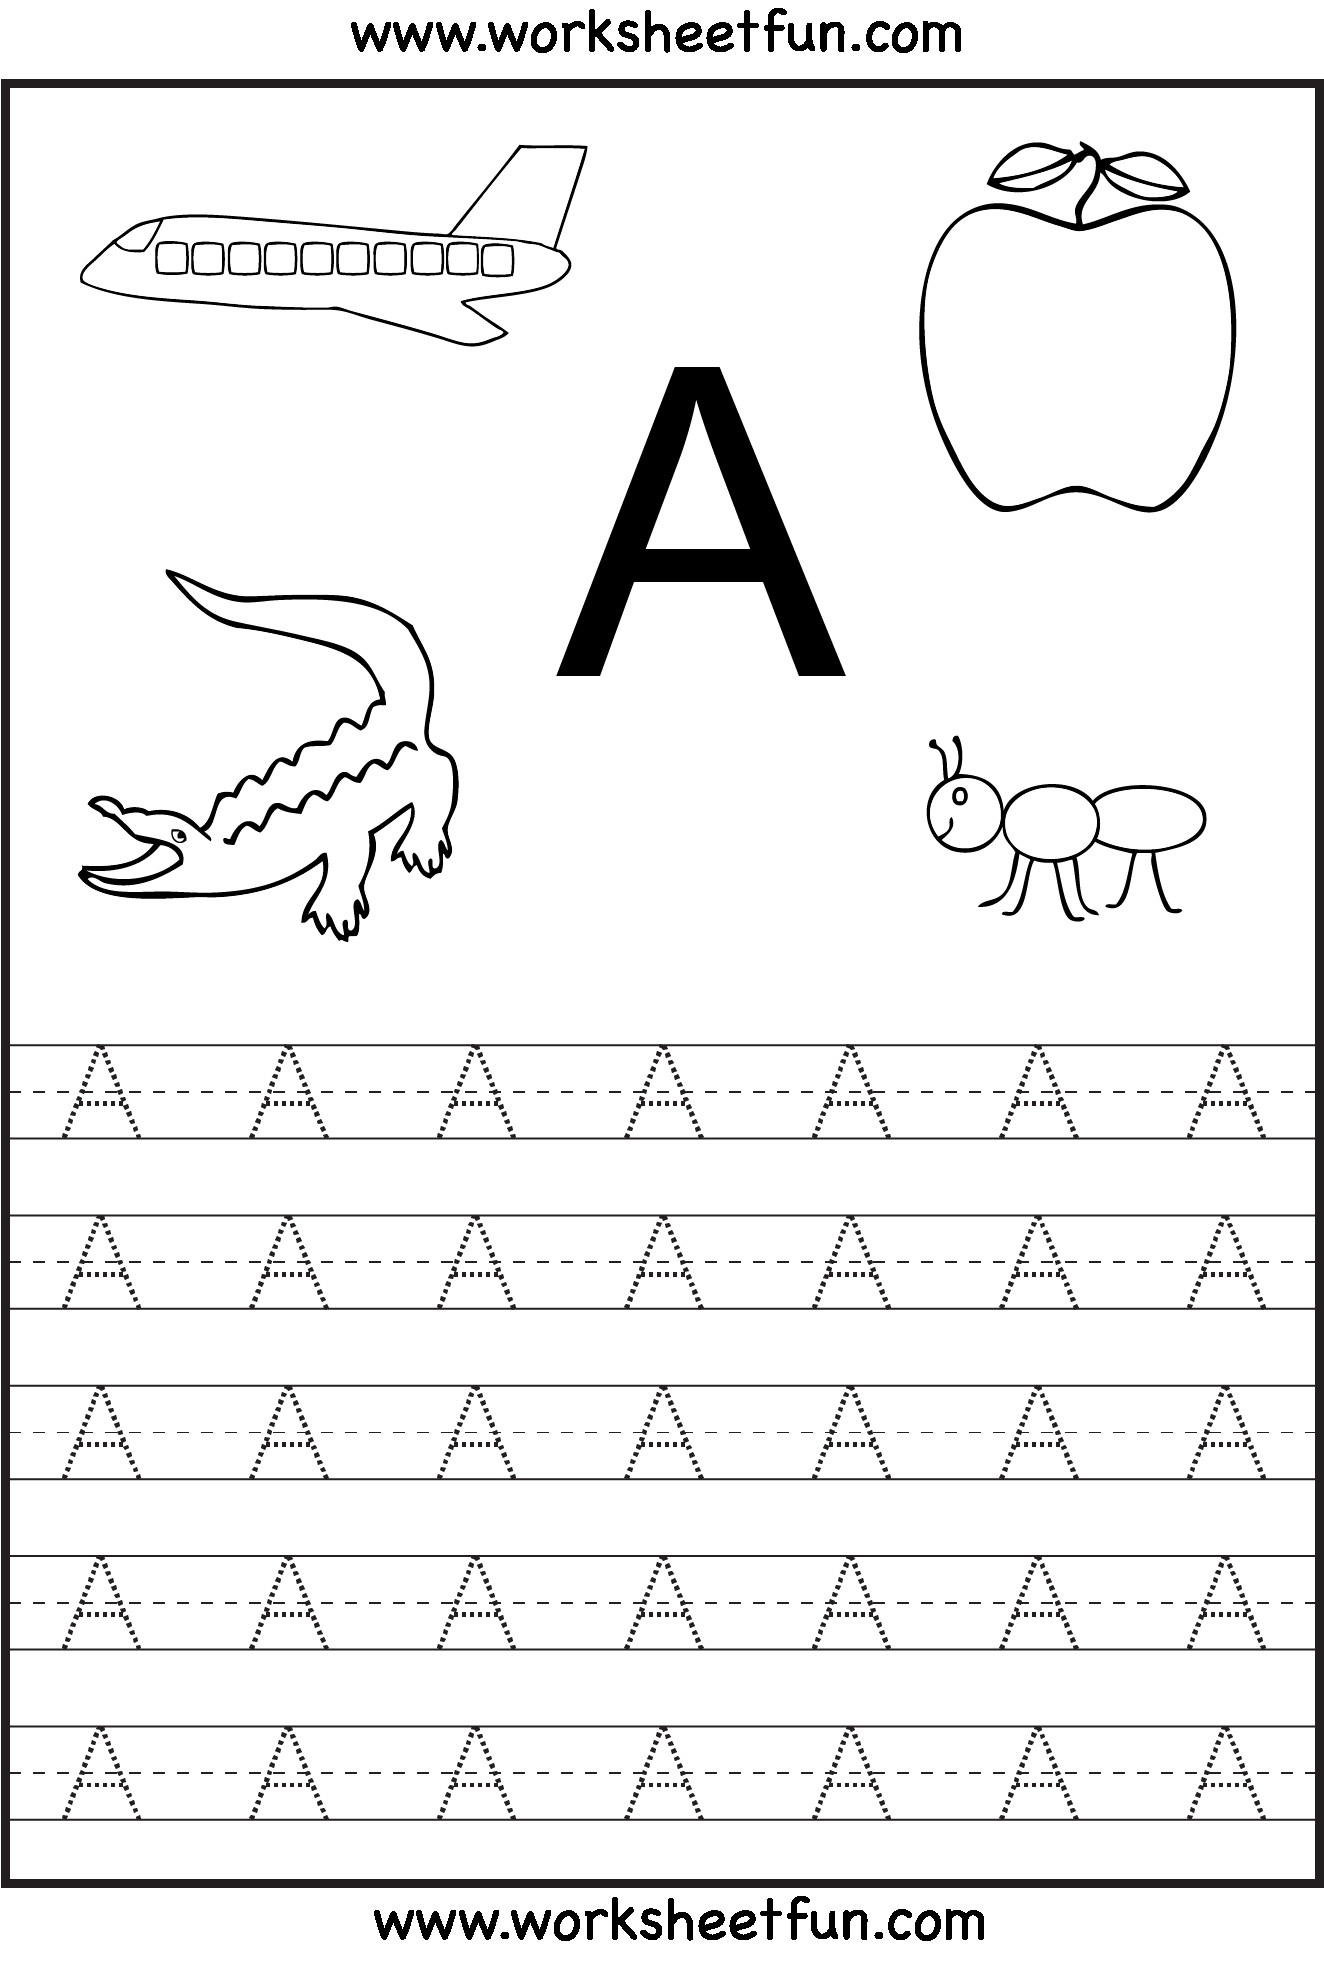 Worksheets For Year Olds Tracing Learning Printable Letter inside Alphabet Worksheets For 3 Year Olds